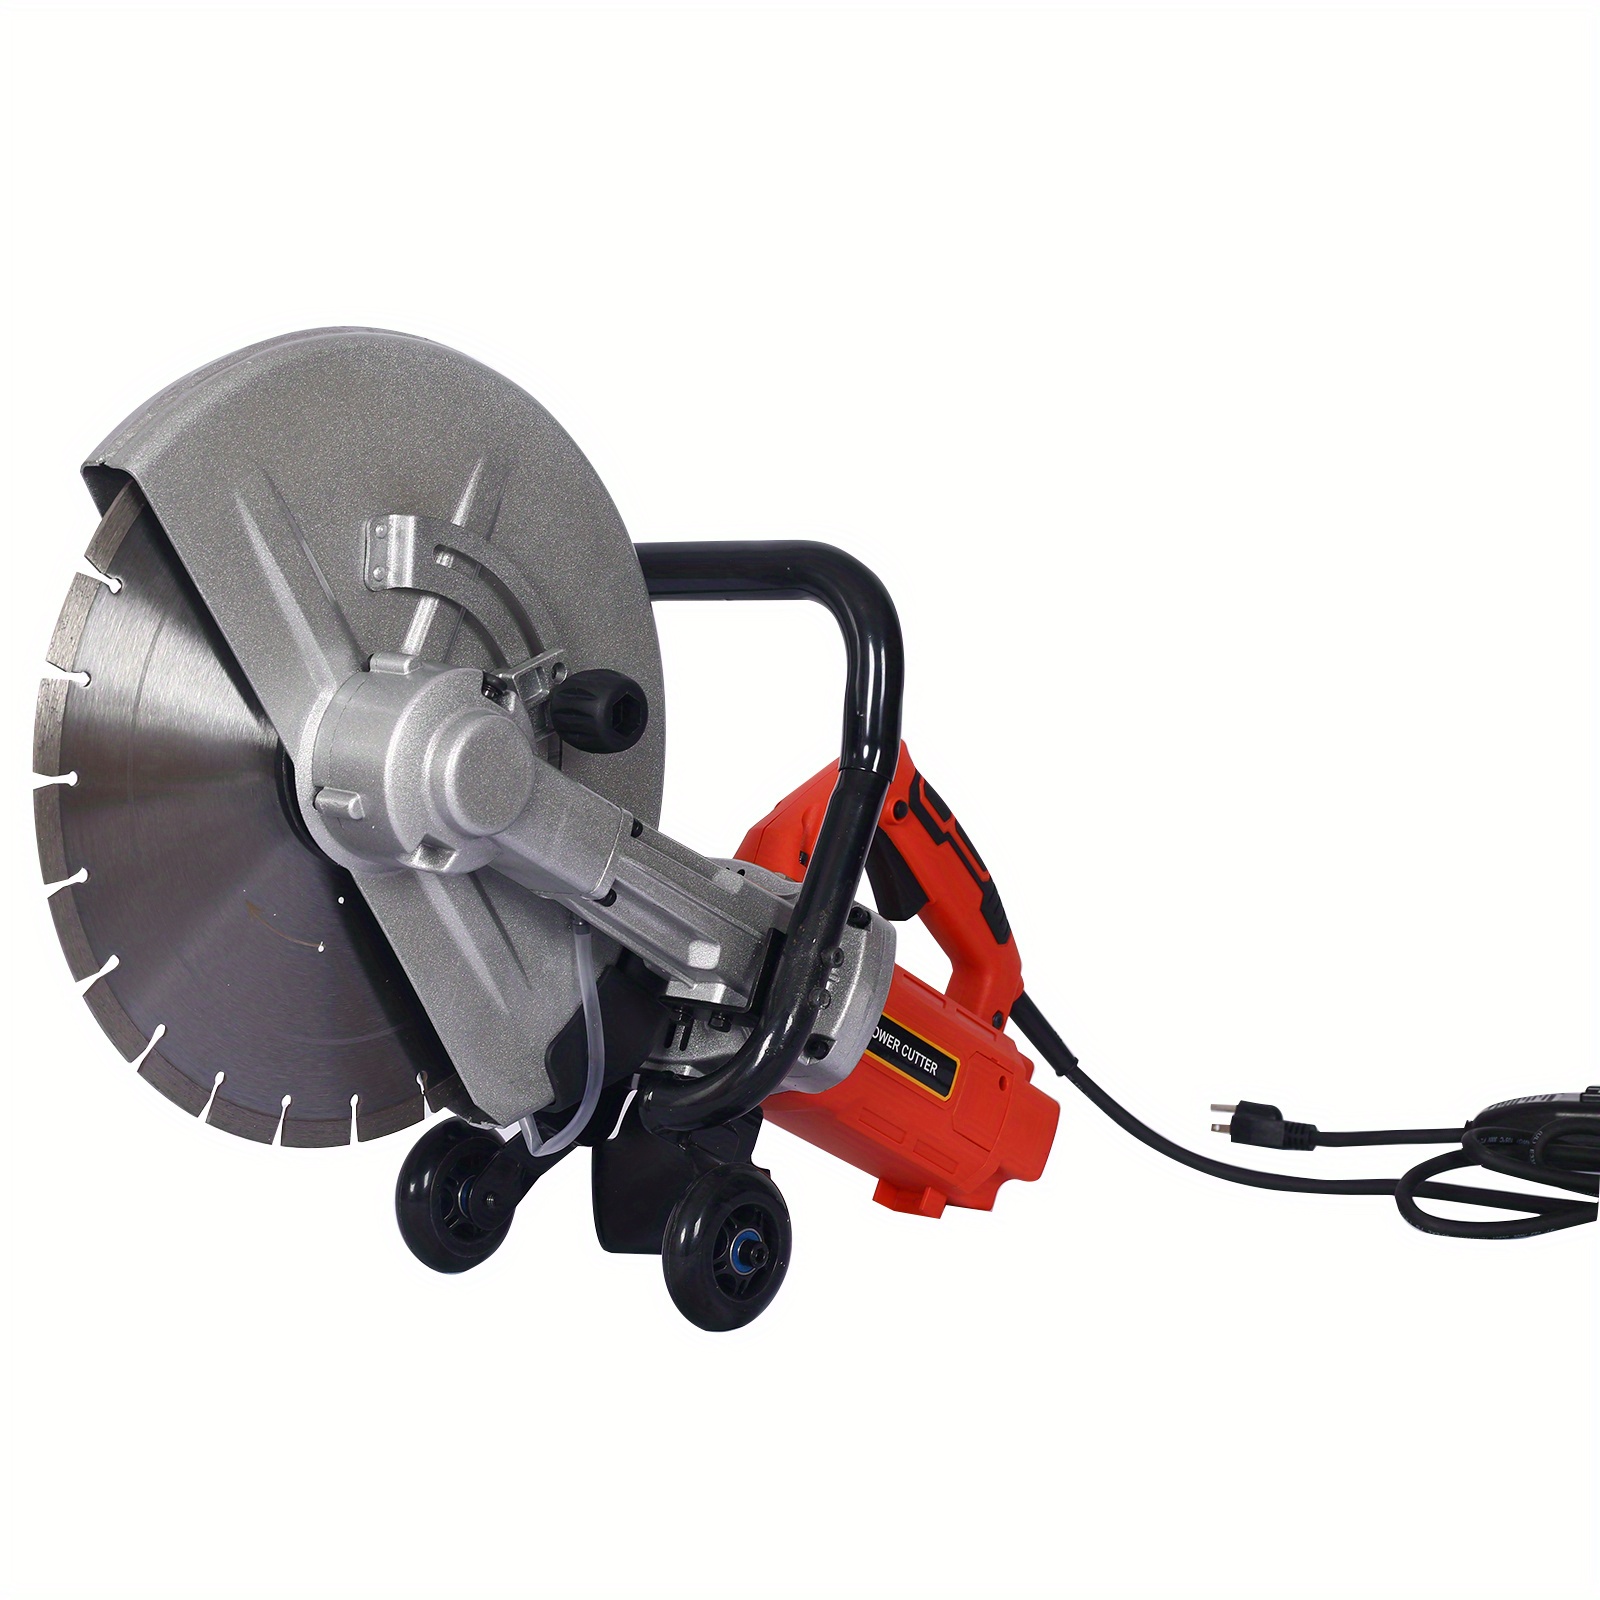 

Cut Off Saw Wet/dry Concrete Saw Cutter Guide Roller With Water Line Attachment 3000w With Blade